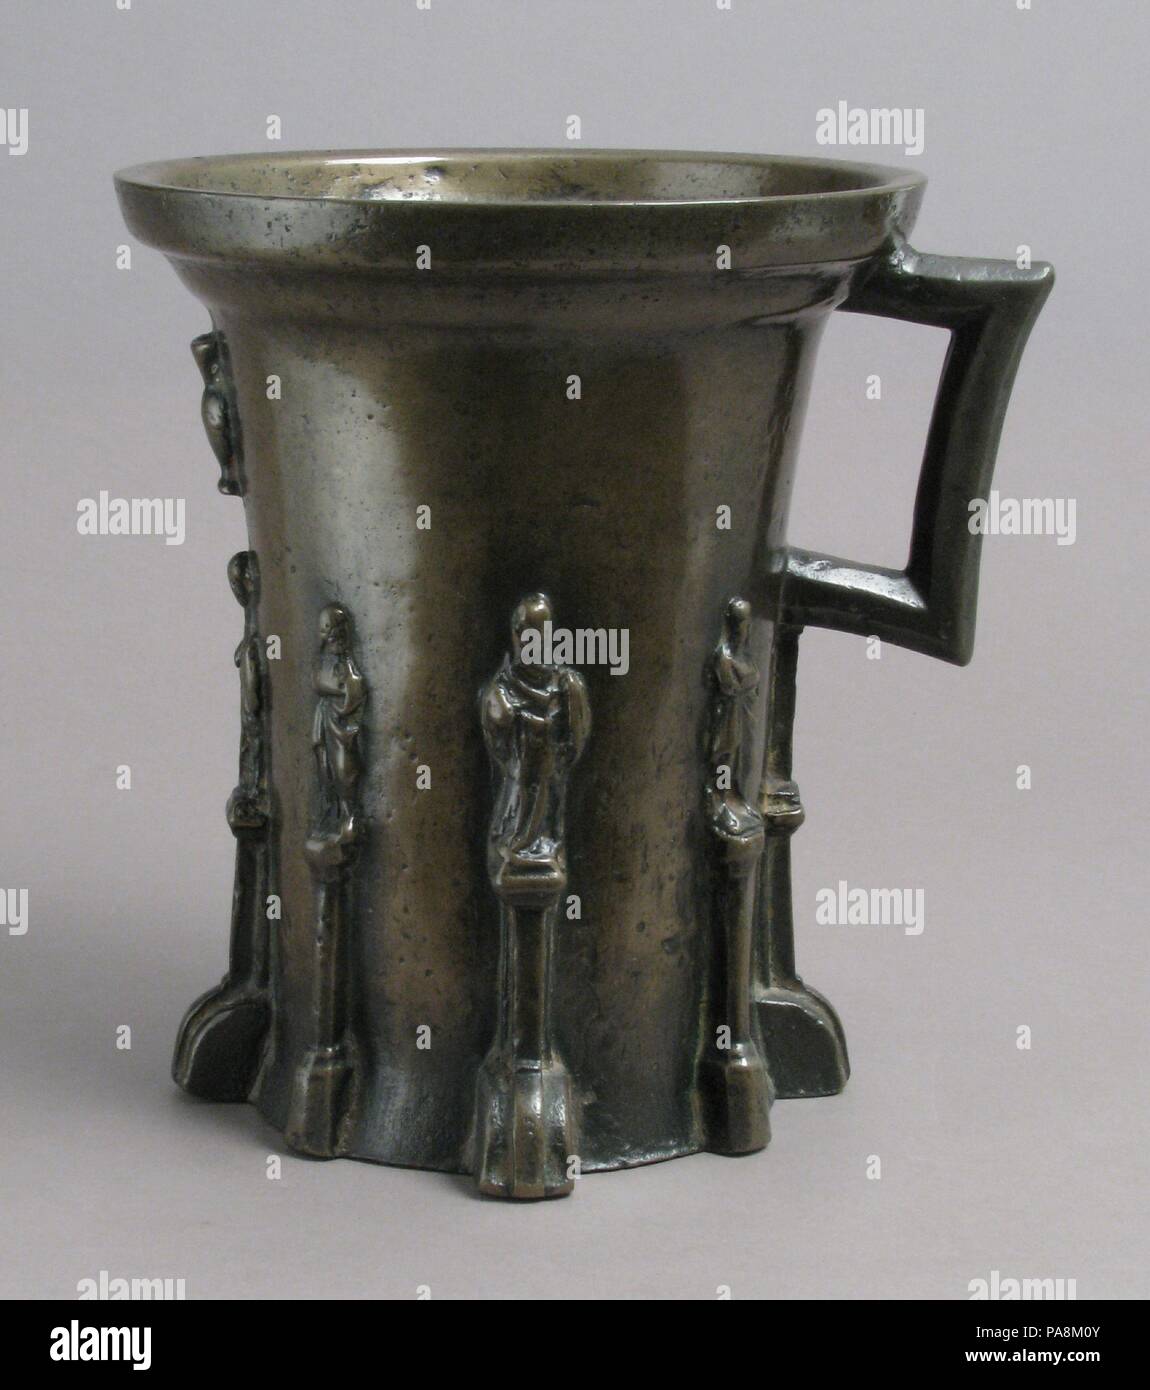 Mortar. Culture: North German. Dimensions: Overall: 7 15/16 x 7 13/16 x 6 11/16 in. (20.2 x 19.8 x 17 cm). Date: 15th century. Museum: Metropolitan Museum of Art, New York, USA. Stock Photo